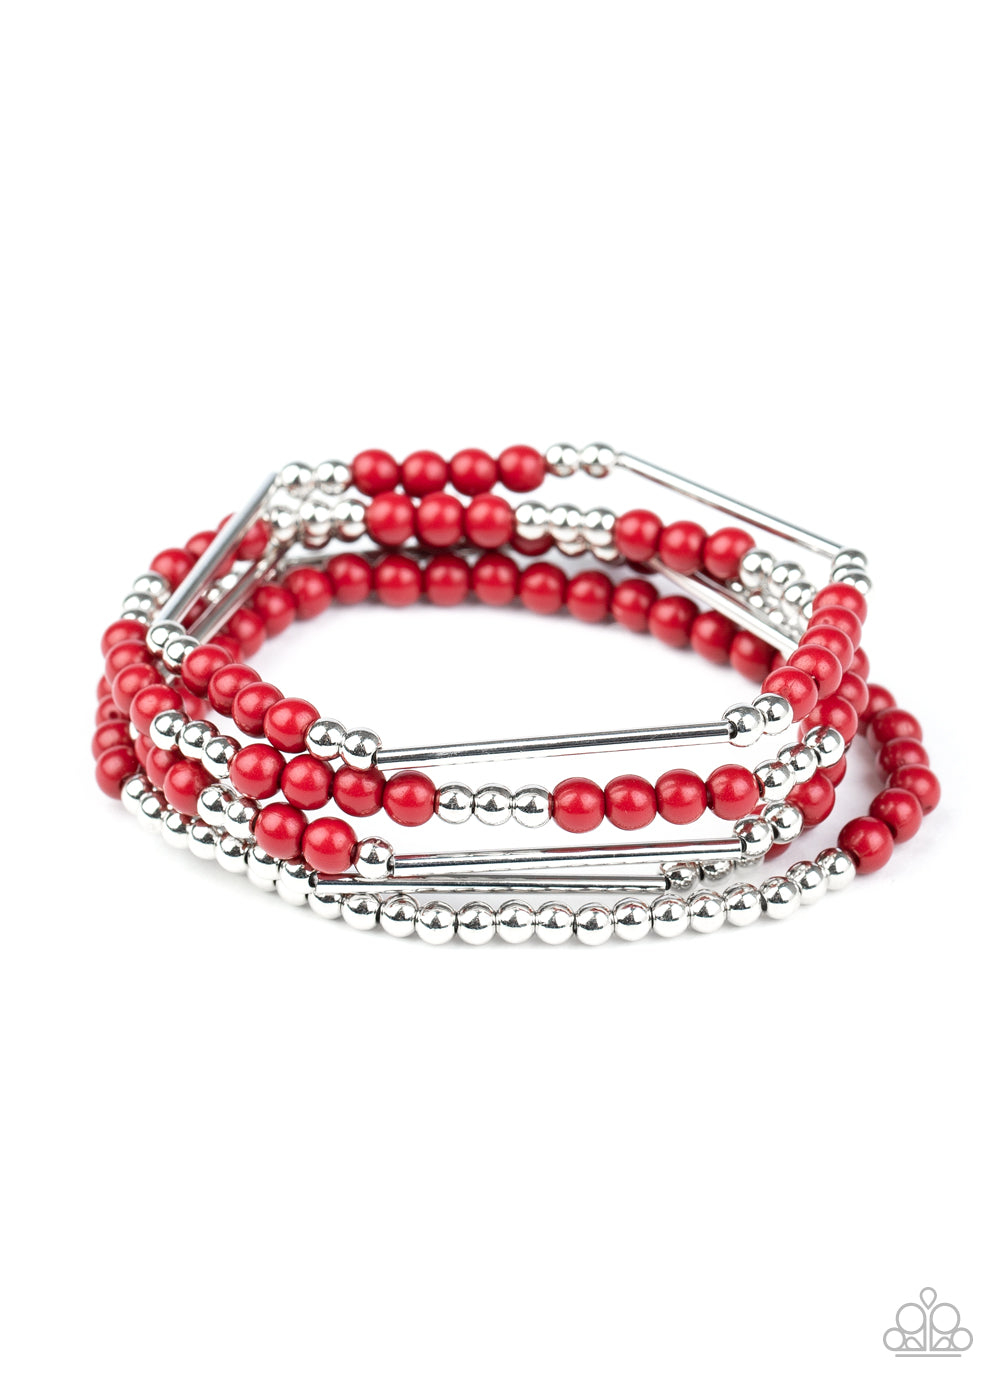 BEAD Between The Lines - Red